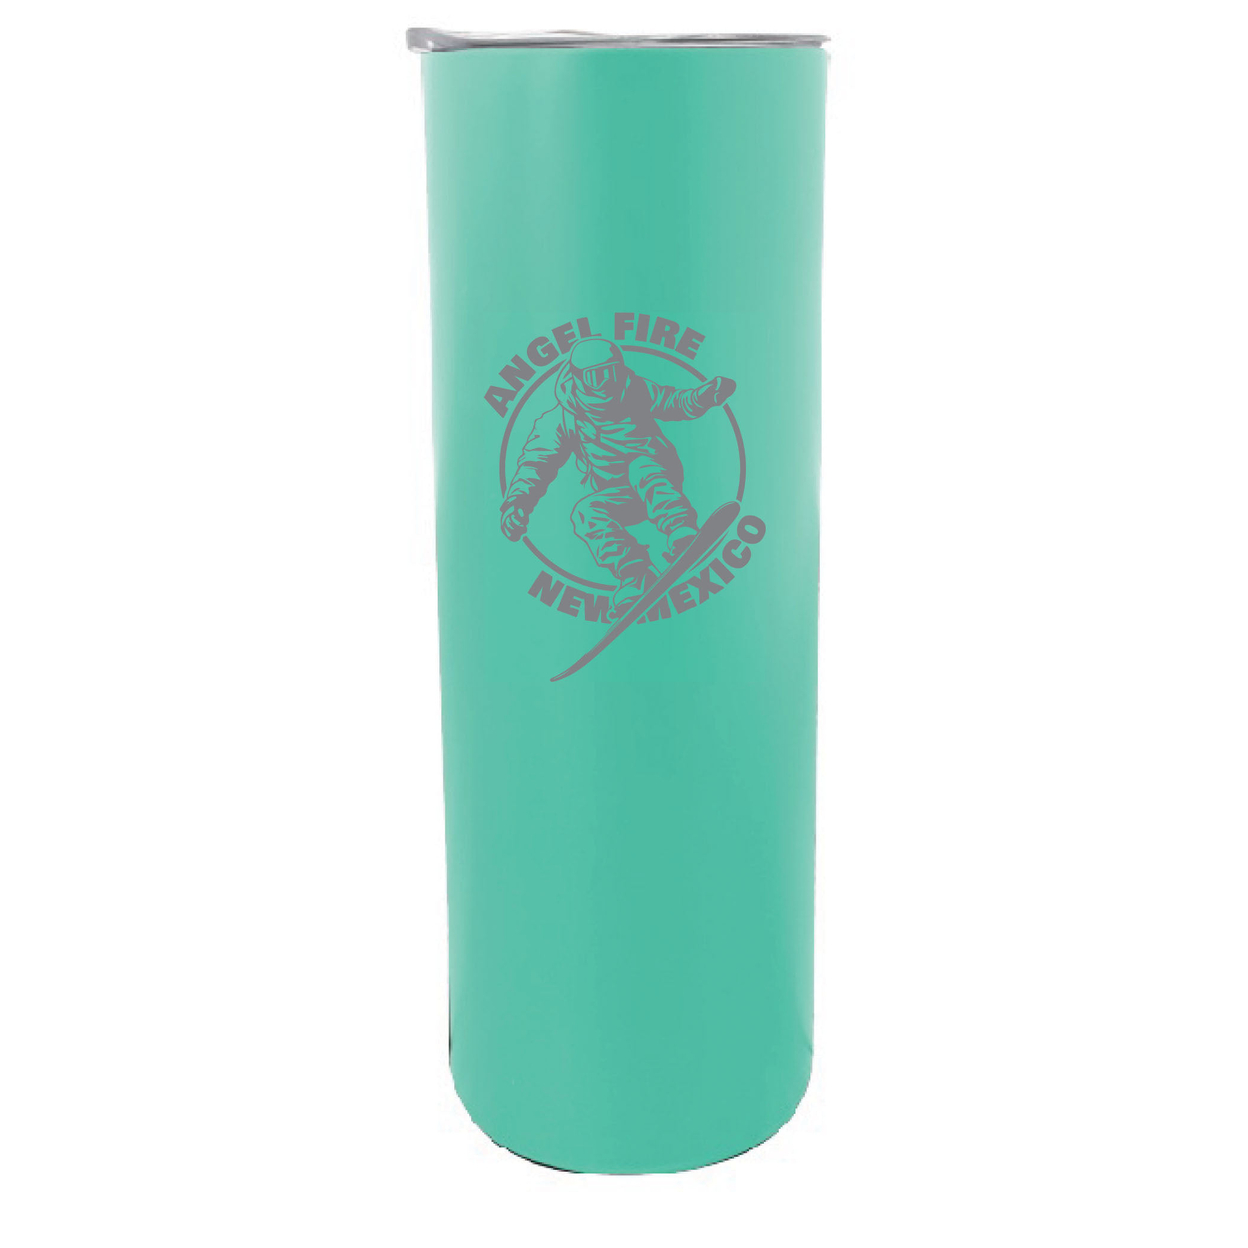 Angel Fire New Mexico Souvenir 20 Oz Engraved Insulated Stainless Steel Skinny Tumbler - Seafoam,,4-Pack